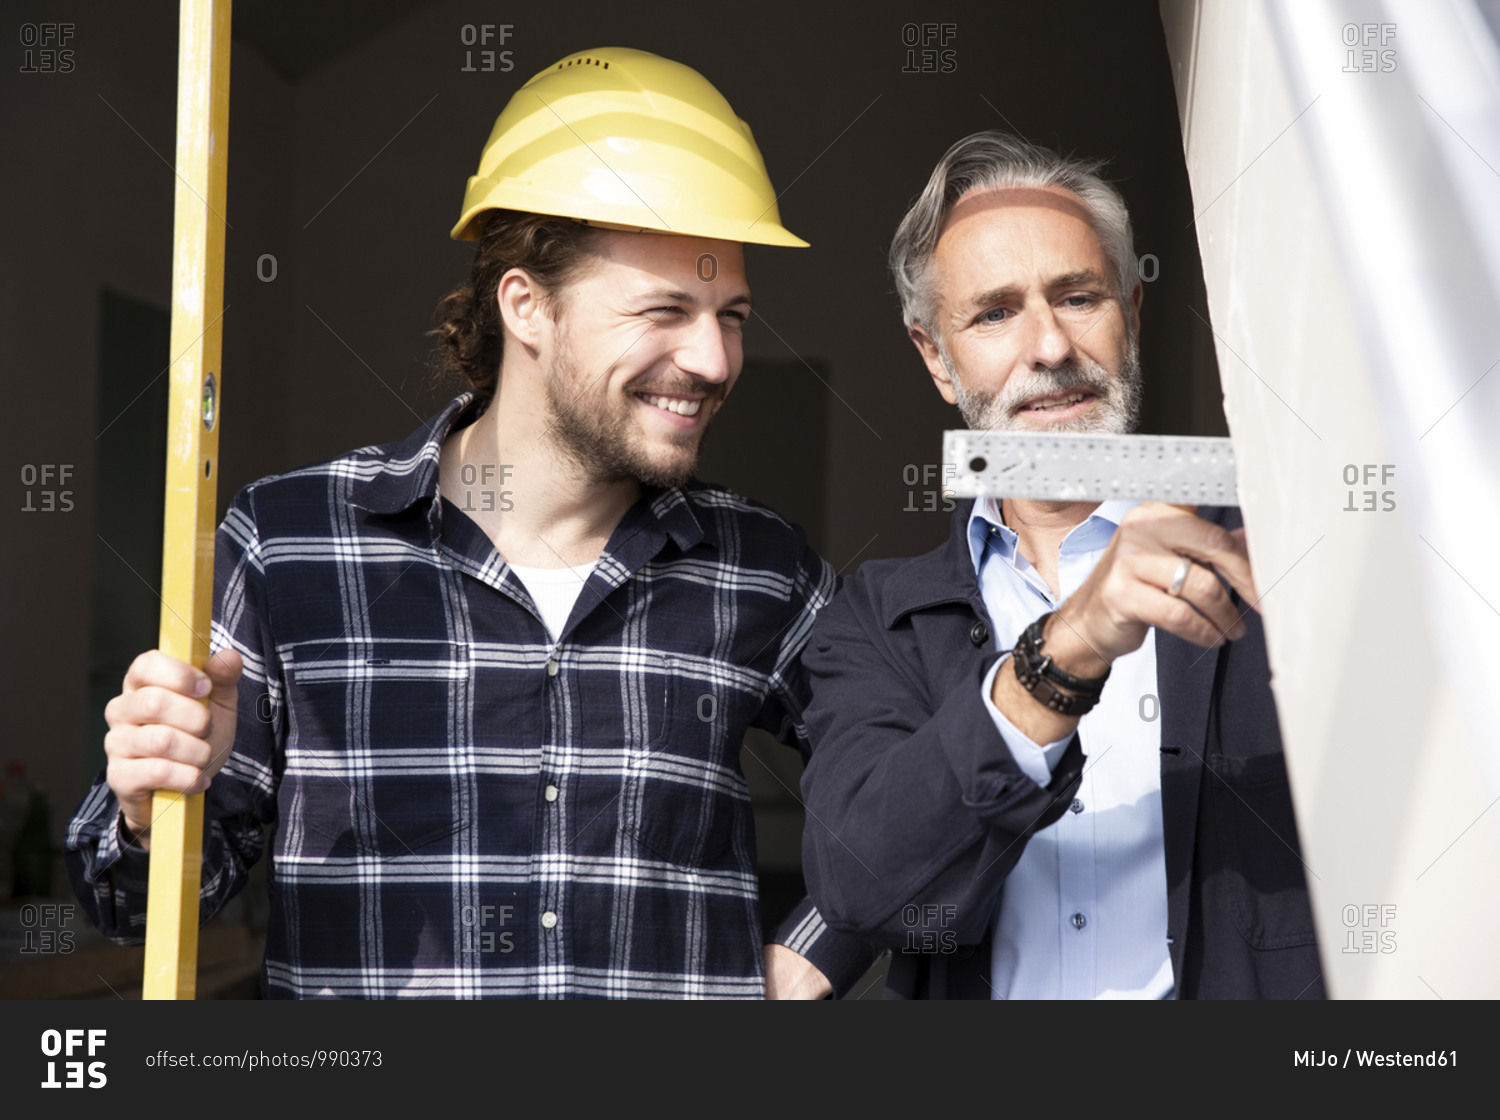 Smiling construction worker looking at measurement showing by architect in constructing house seen through window